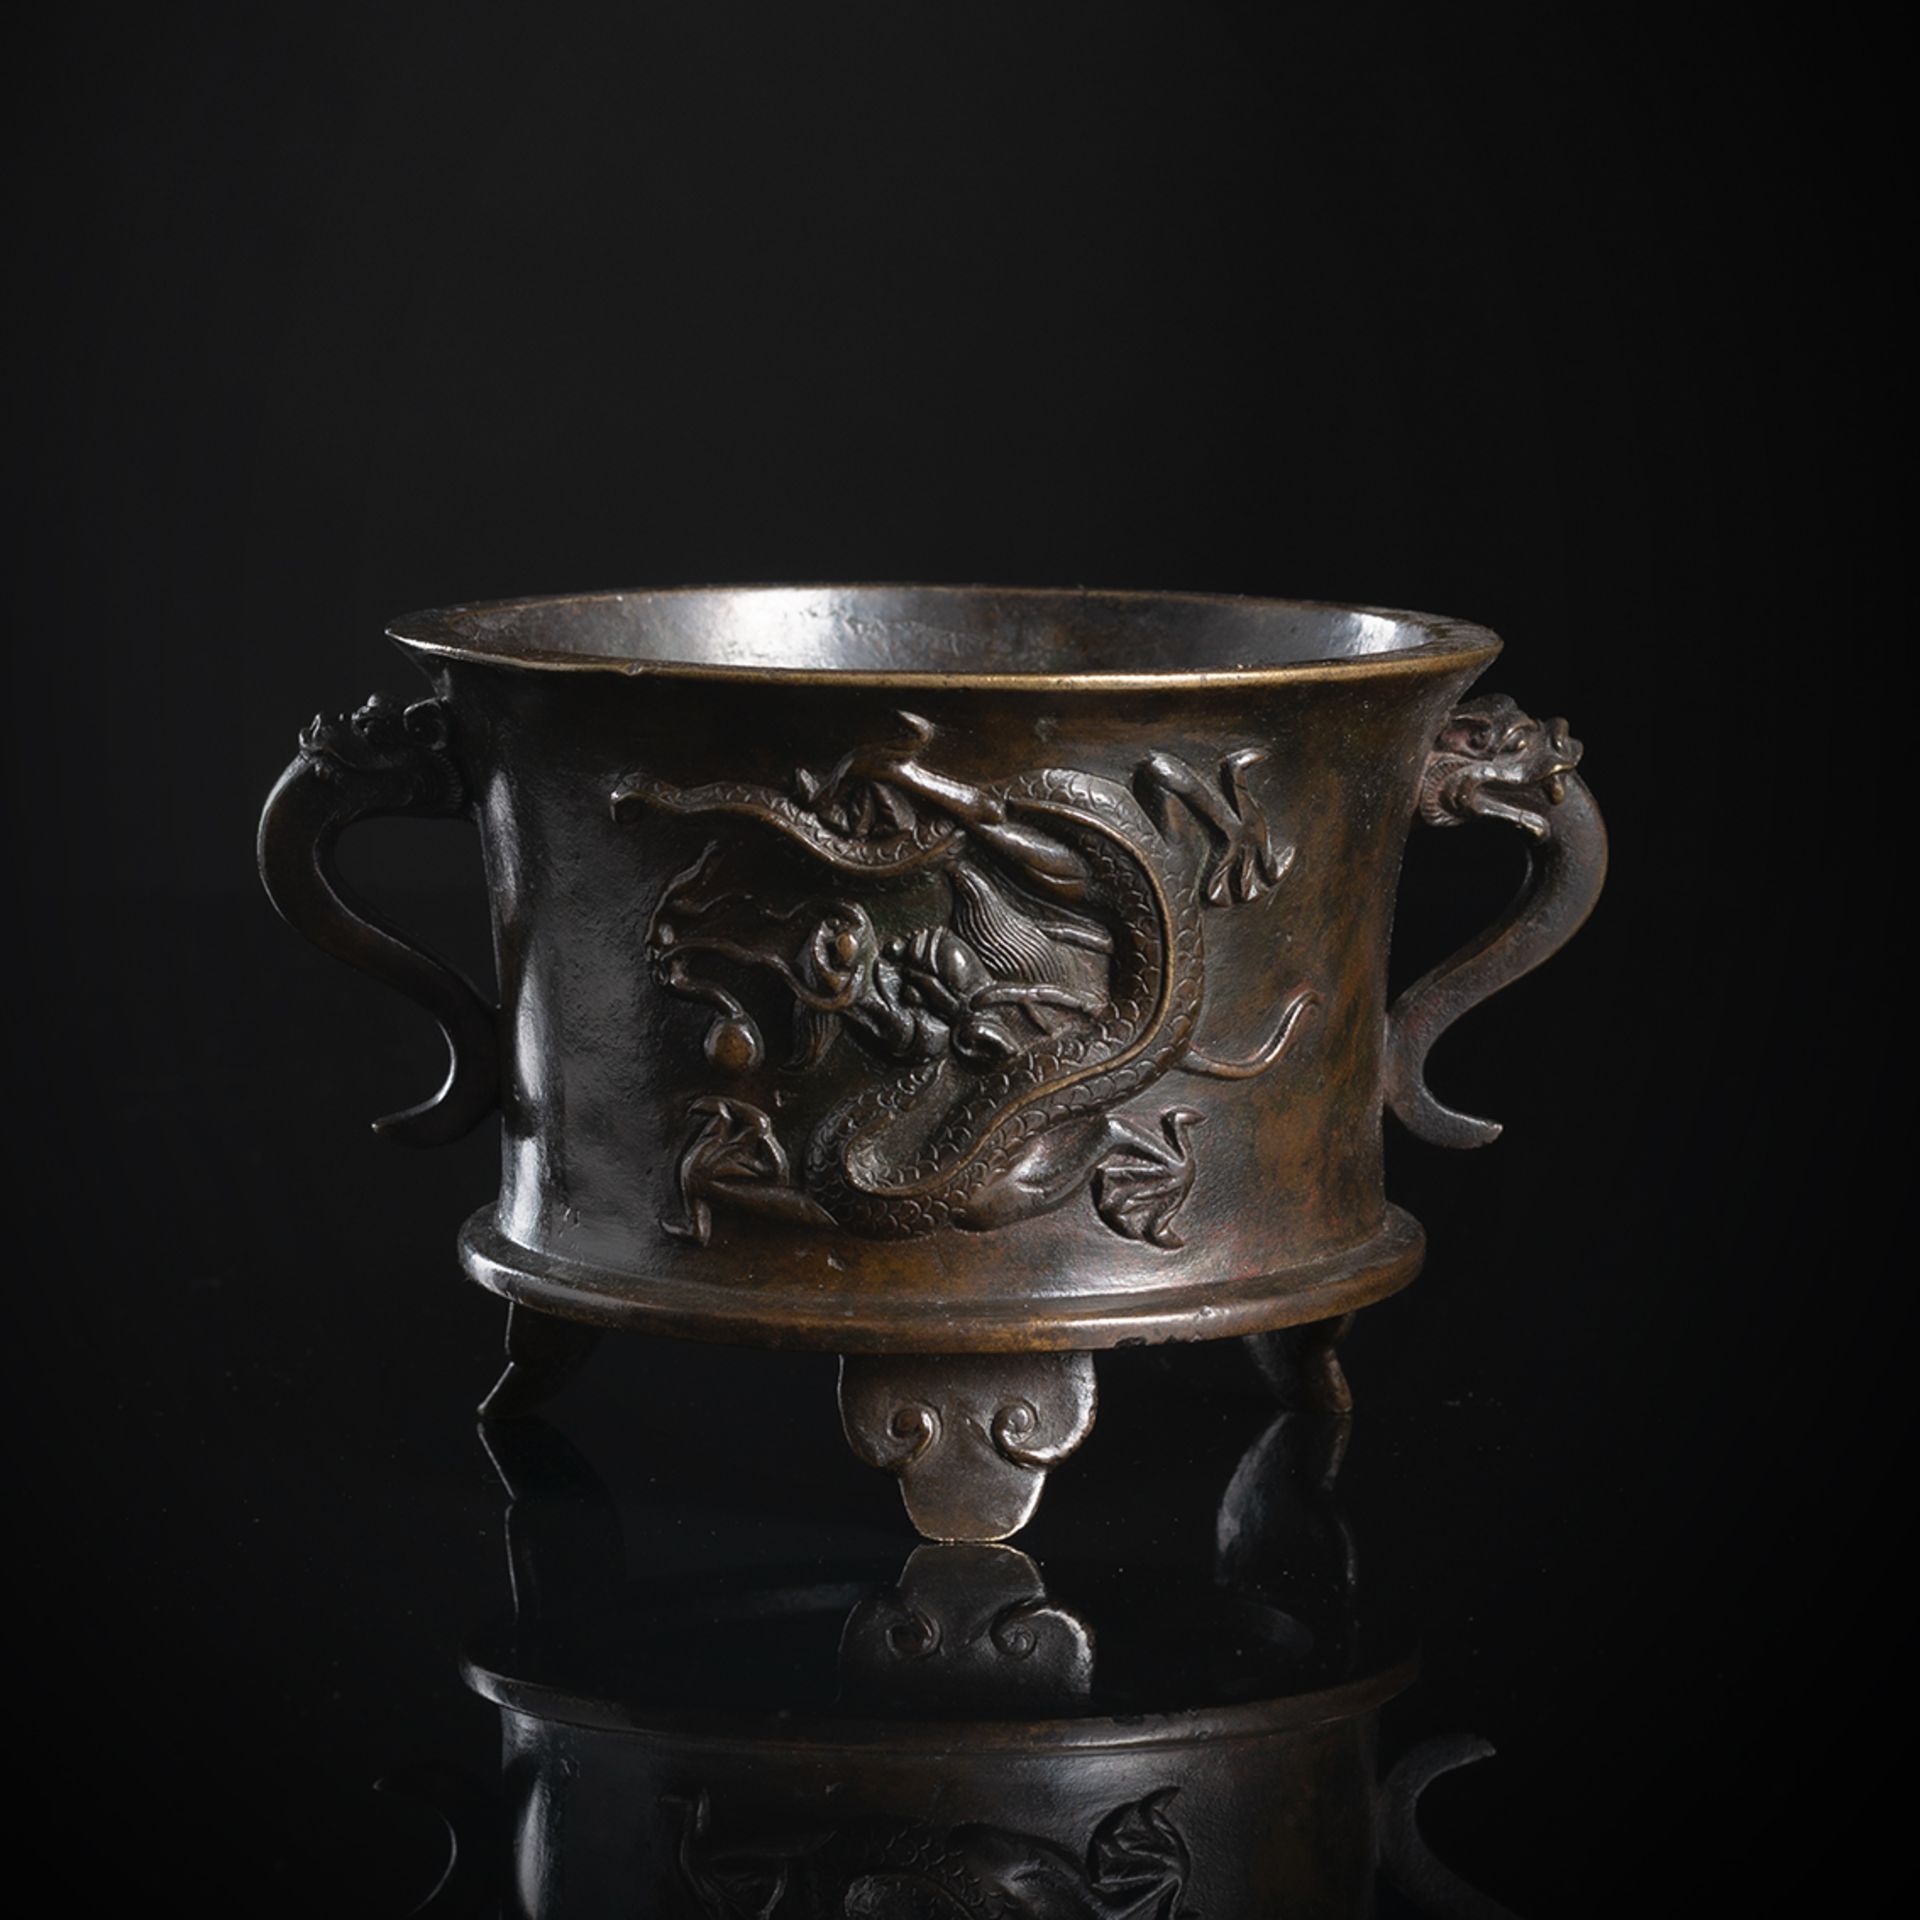 A BRONZE TRIPOD CENSER WITH HANDLES AND DRAGON DECORATION